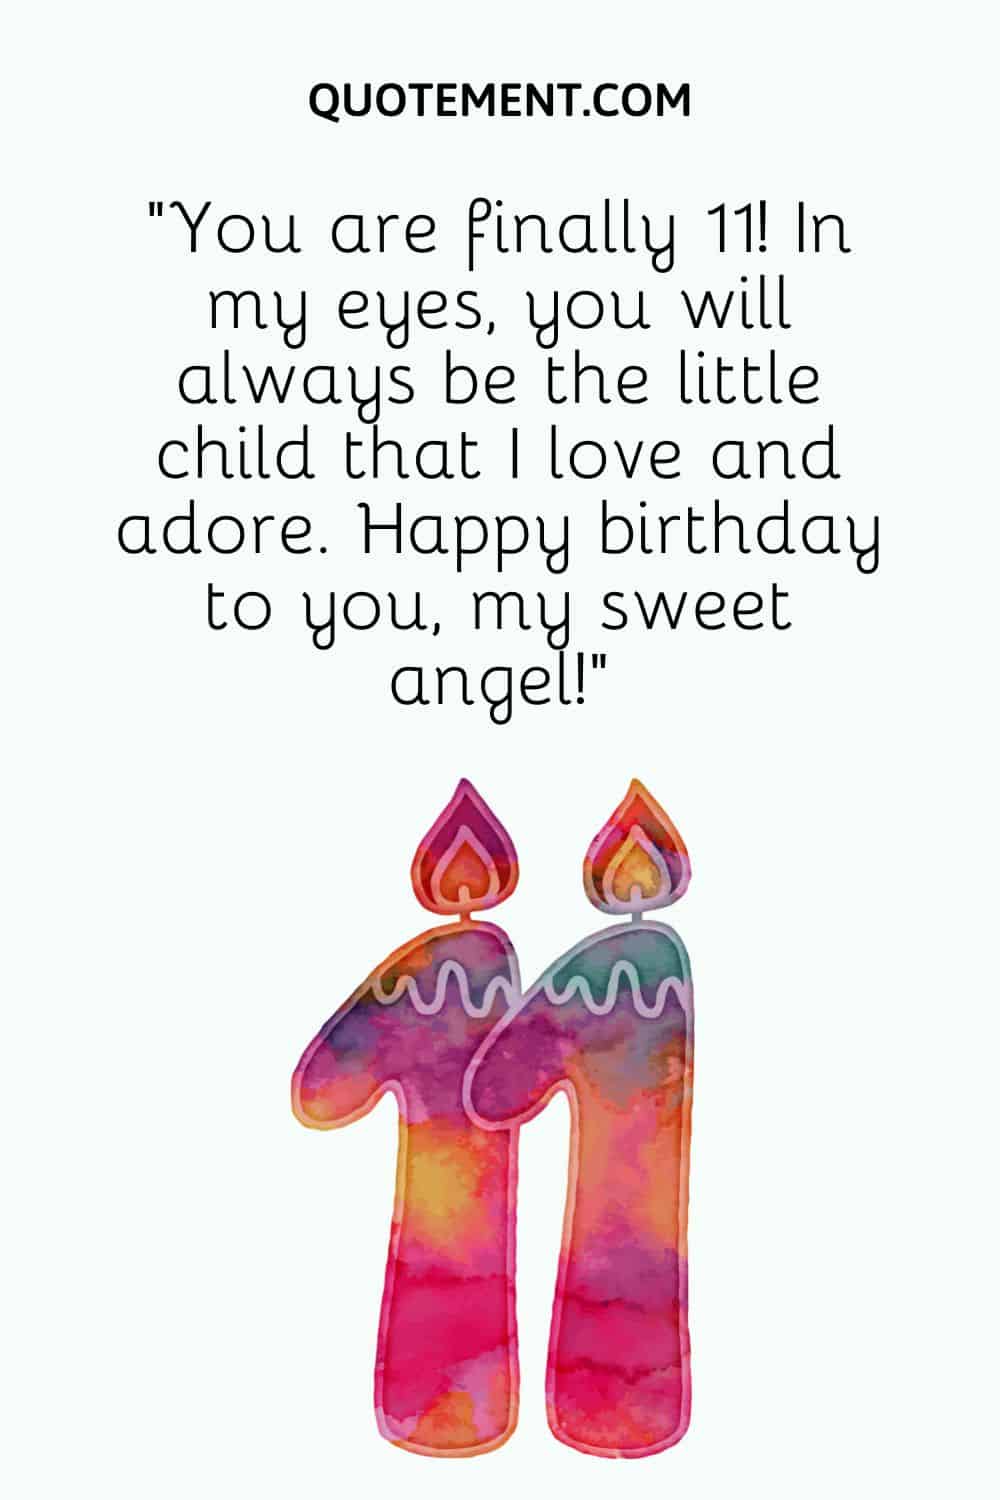 “You are finally 11! In my eyes, you will always be the little child that I love and adore. Happy birthday to you, my sweet angel!”